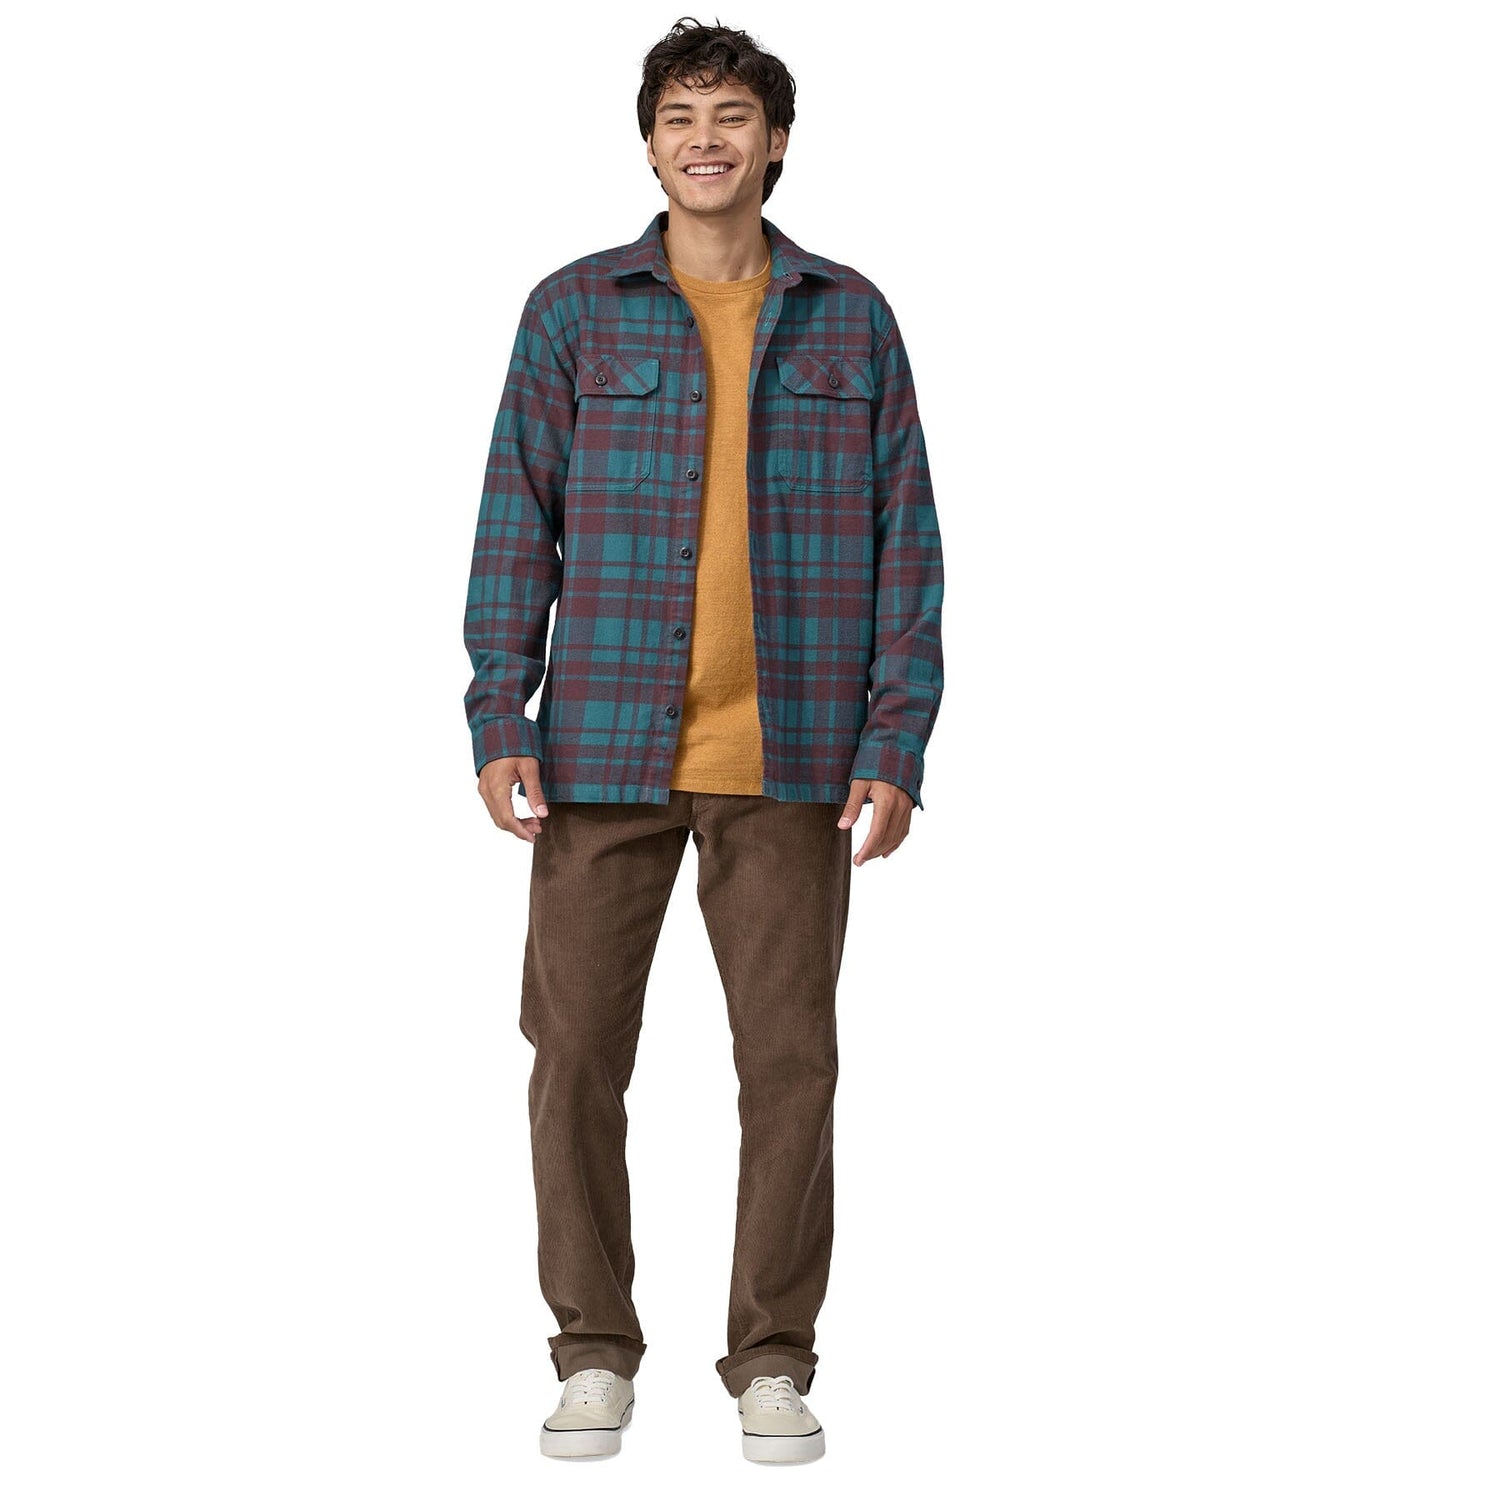 Patagonia M's Long-Sleeved Midweight Fjord Flannel Shirt - Organic Cotton Ice Caps: Belay Blue Shirt